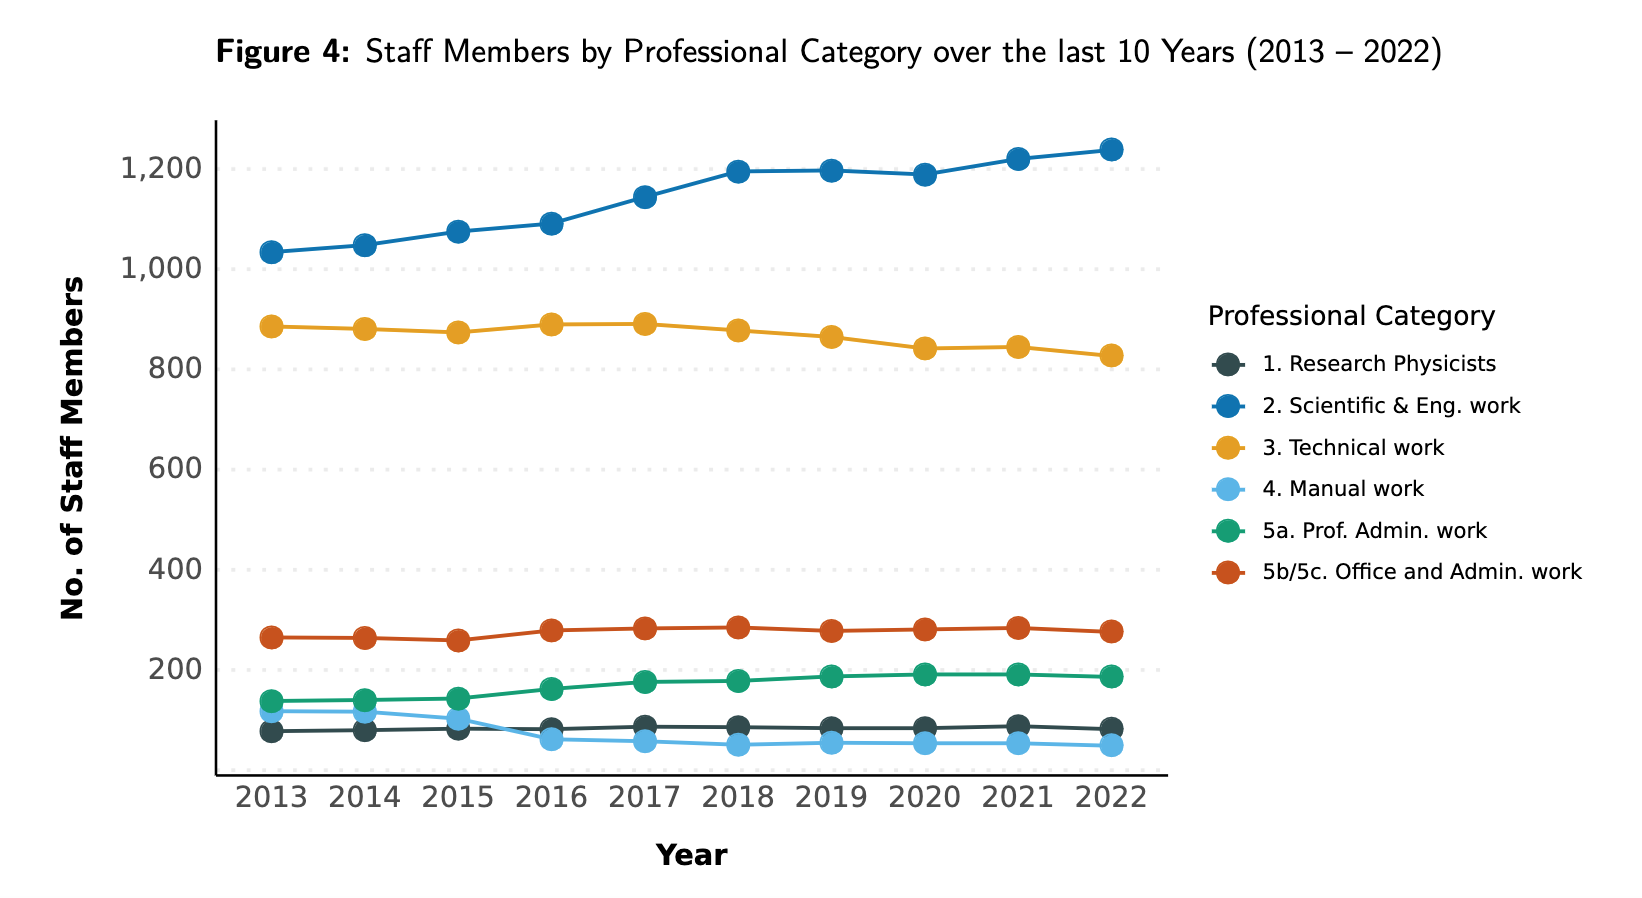 Staff Members by Professional Category to 2022